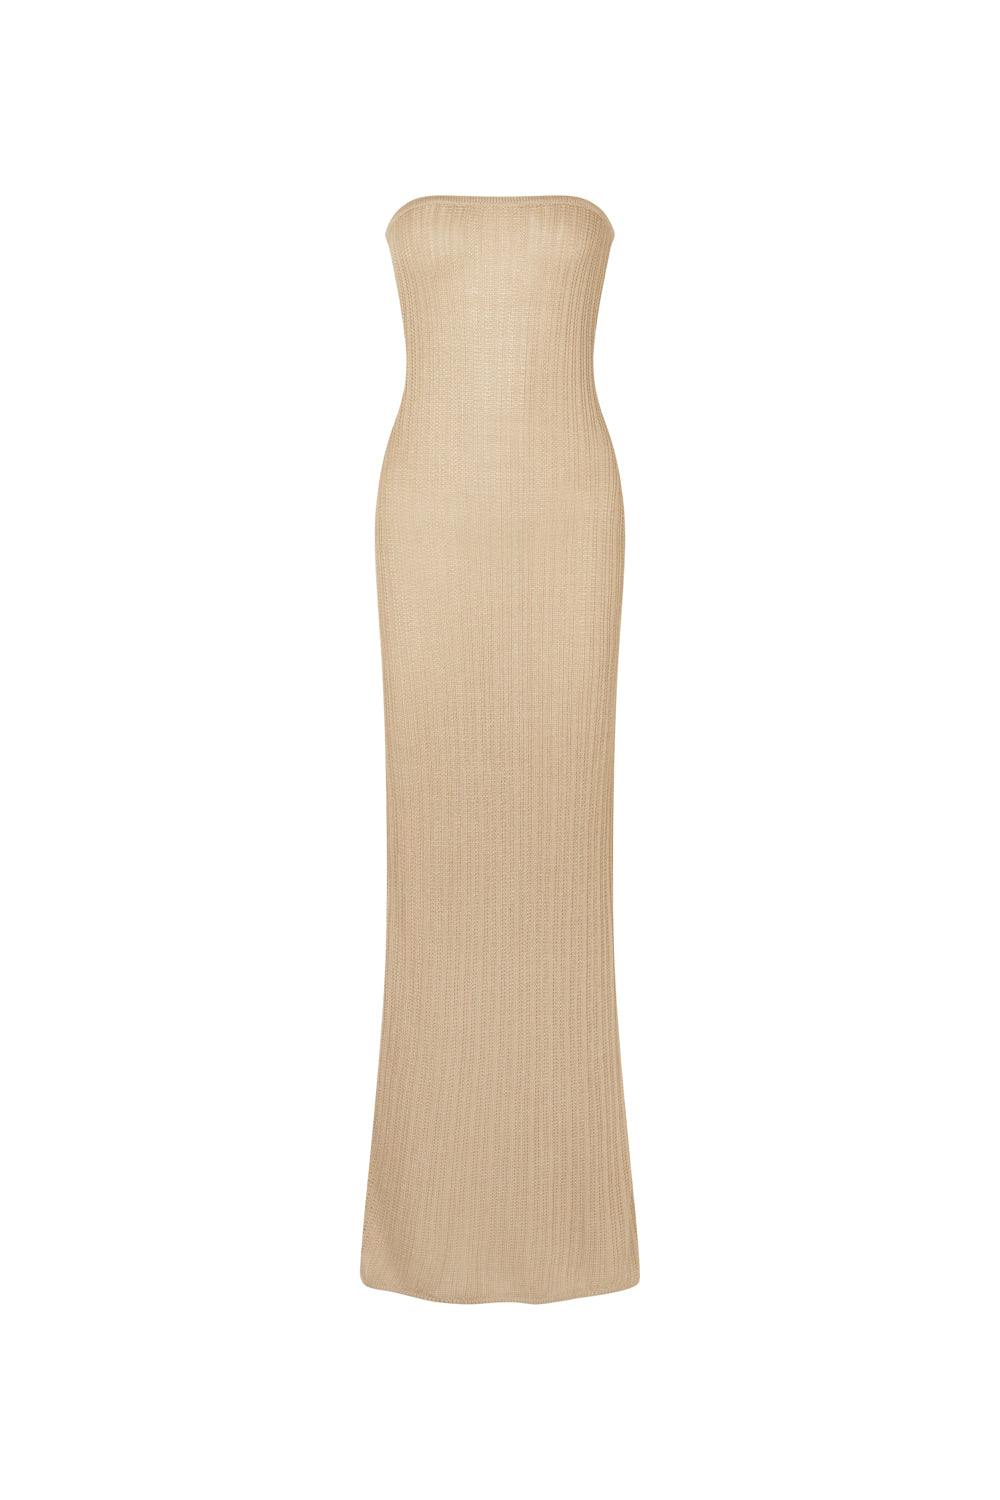 flook the label seona bandeau maxi dress knit caramel product image front 